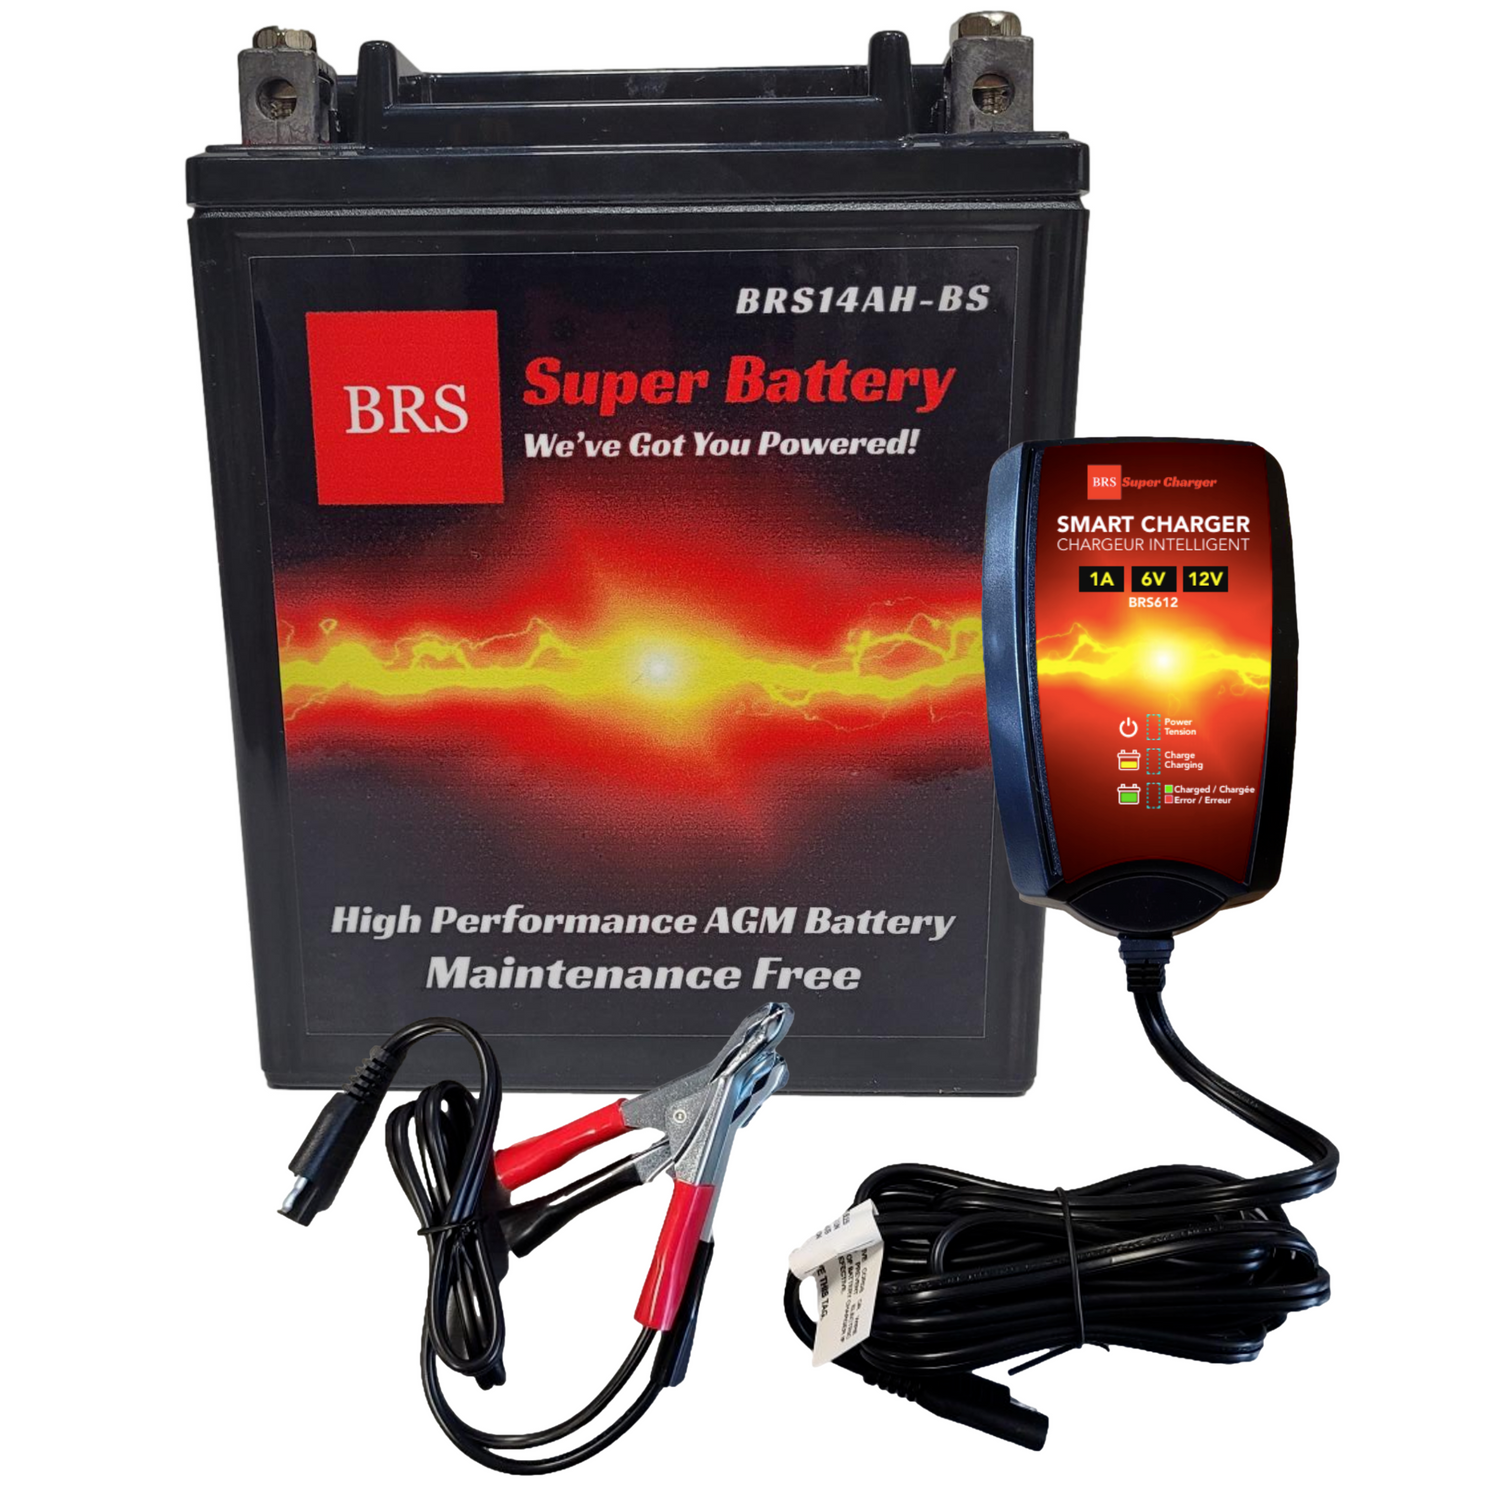 BRS14AH-BS 30 Day Warranty Battery & Smart Charger / Maintainer Combo Bundle Kit - BRS Super Battery